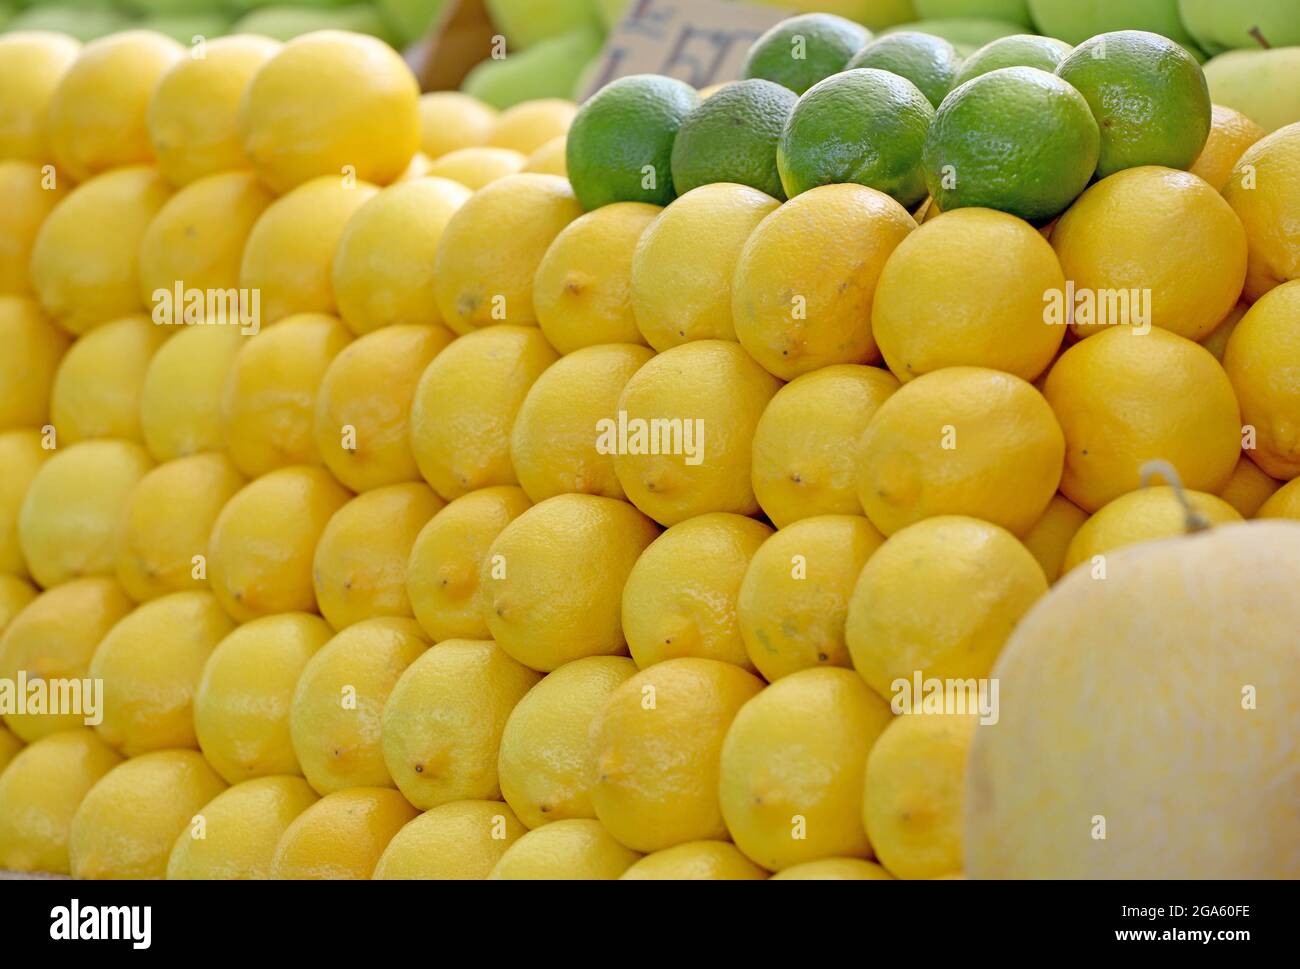 Limes and Yellow lemons background and pattern Stock Photo